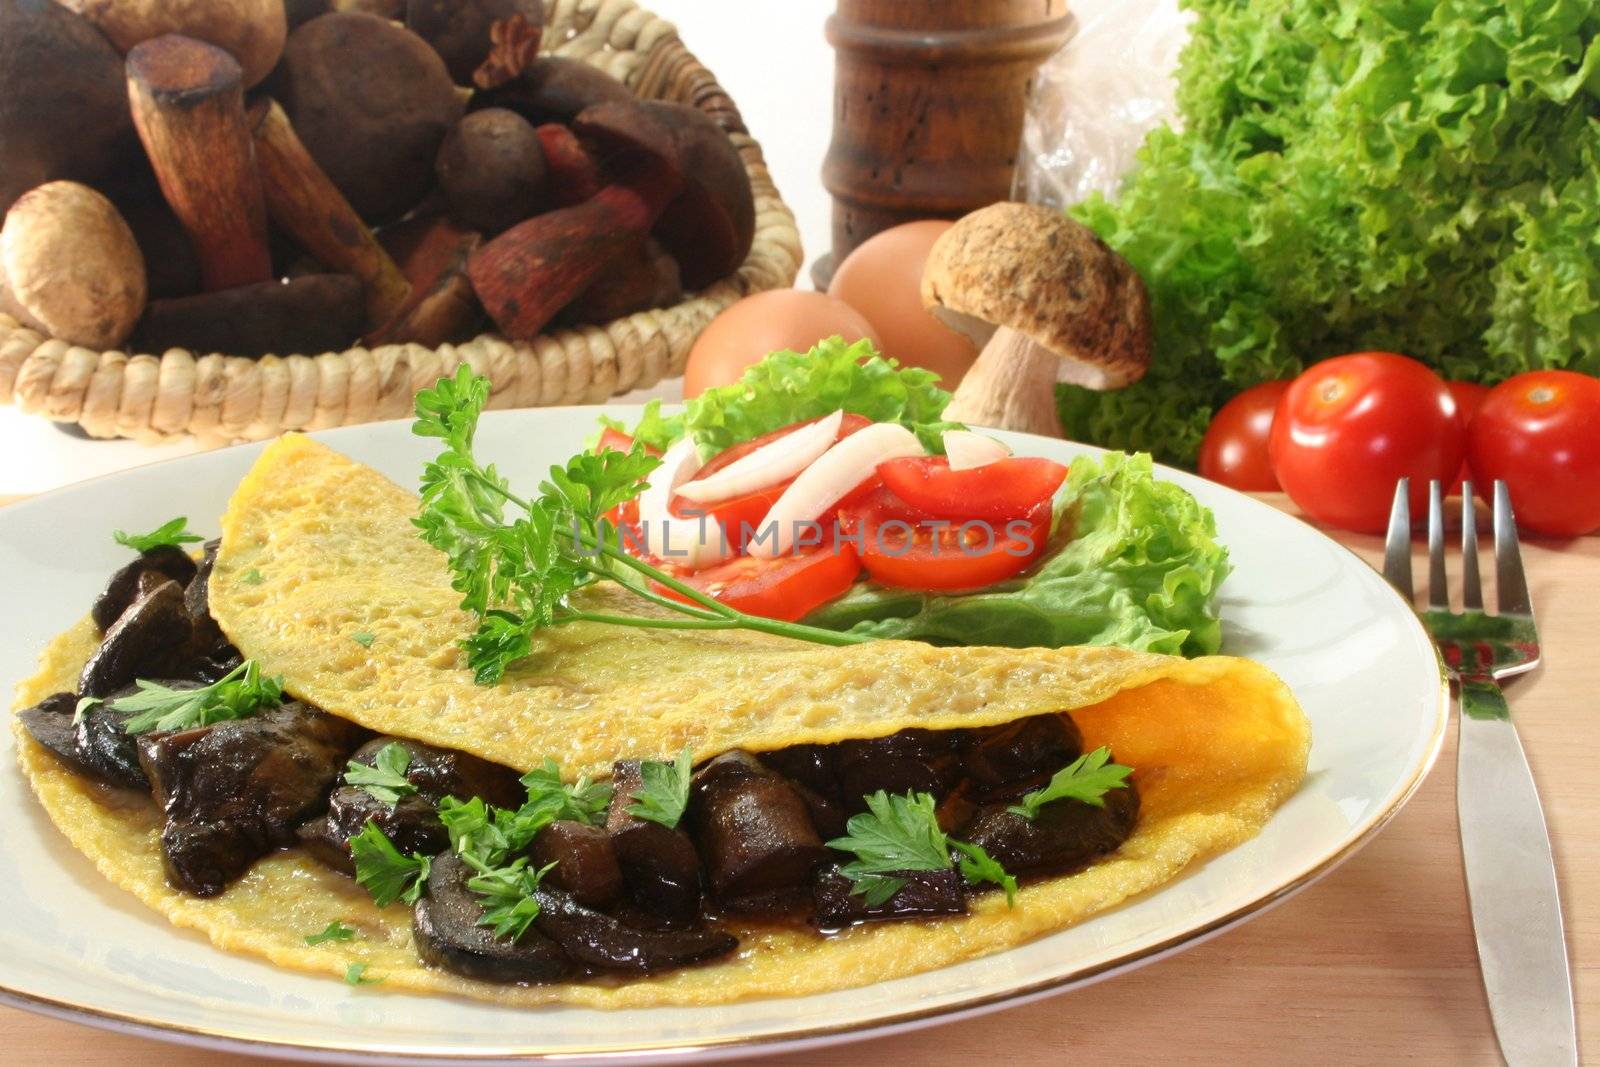 an omelet stuffed with wild mushrooms and fresh salad